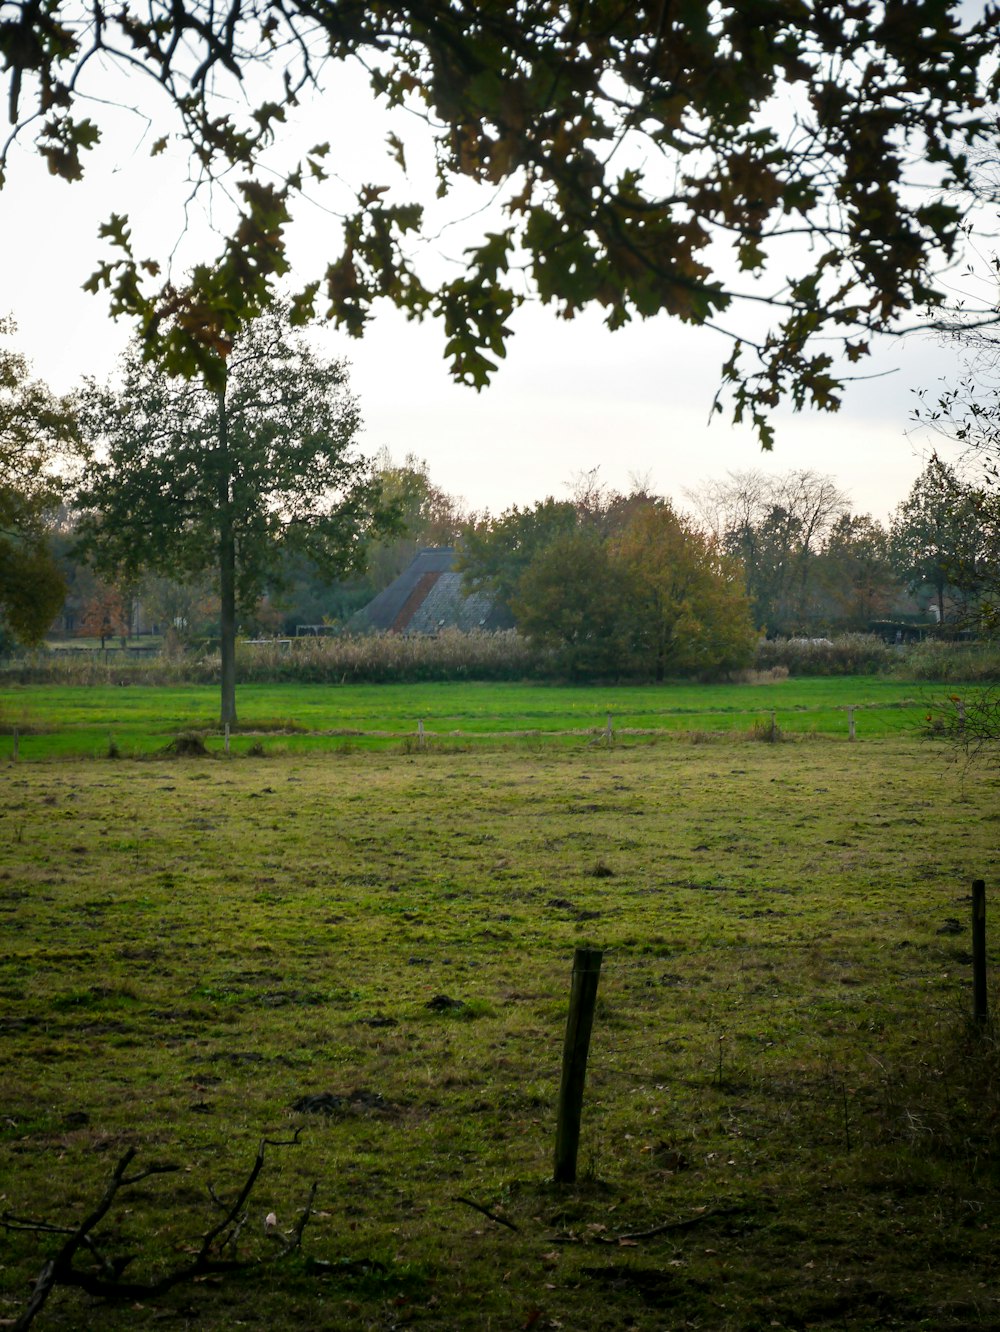 green grass field with trees during daytime